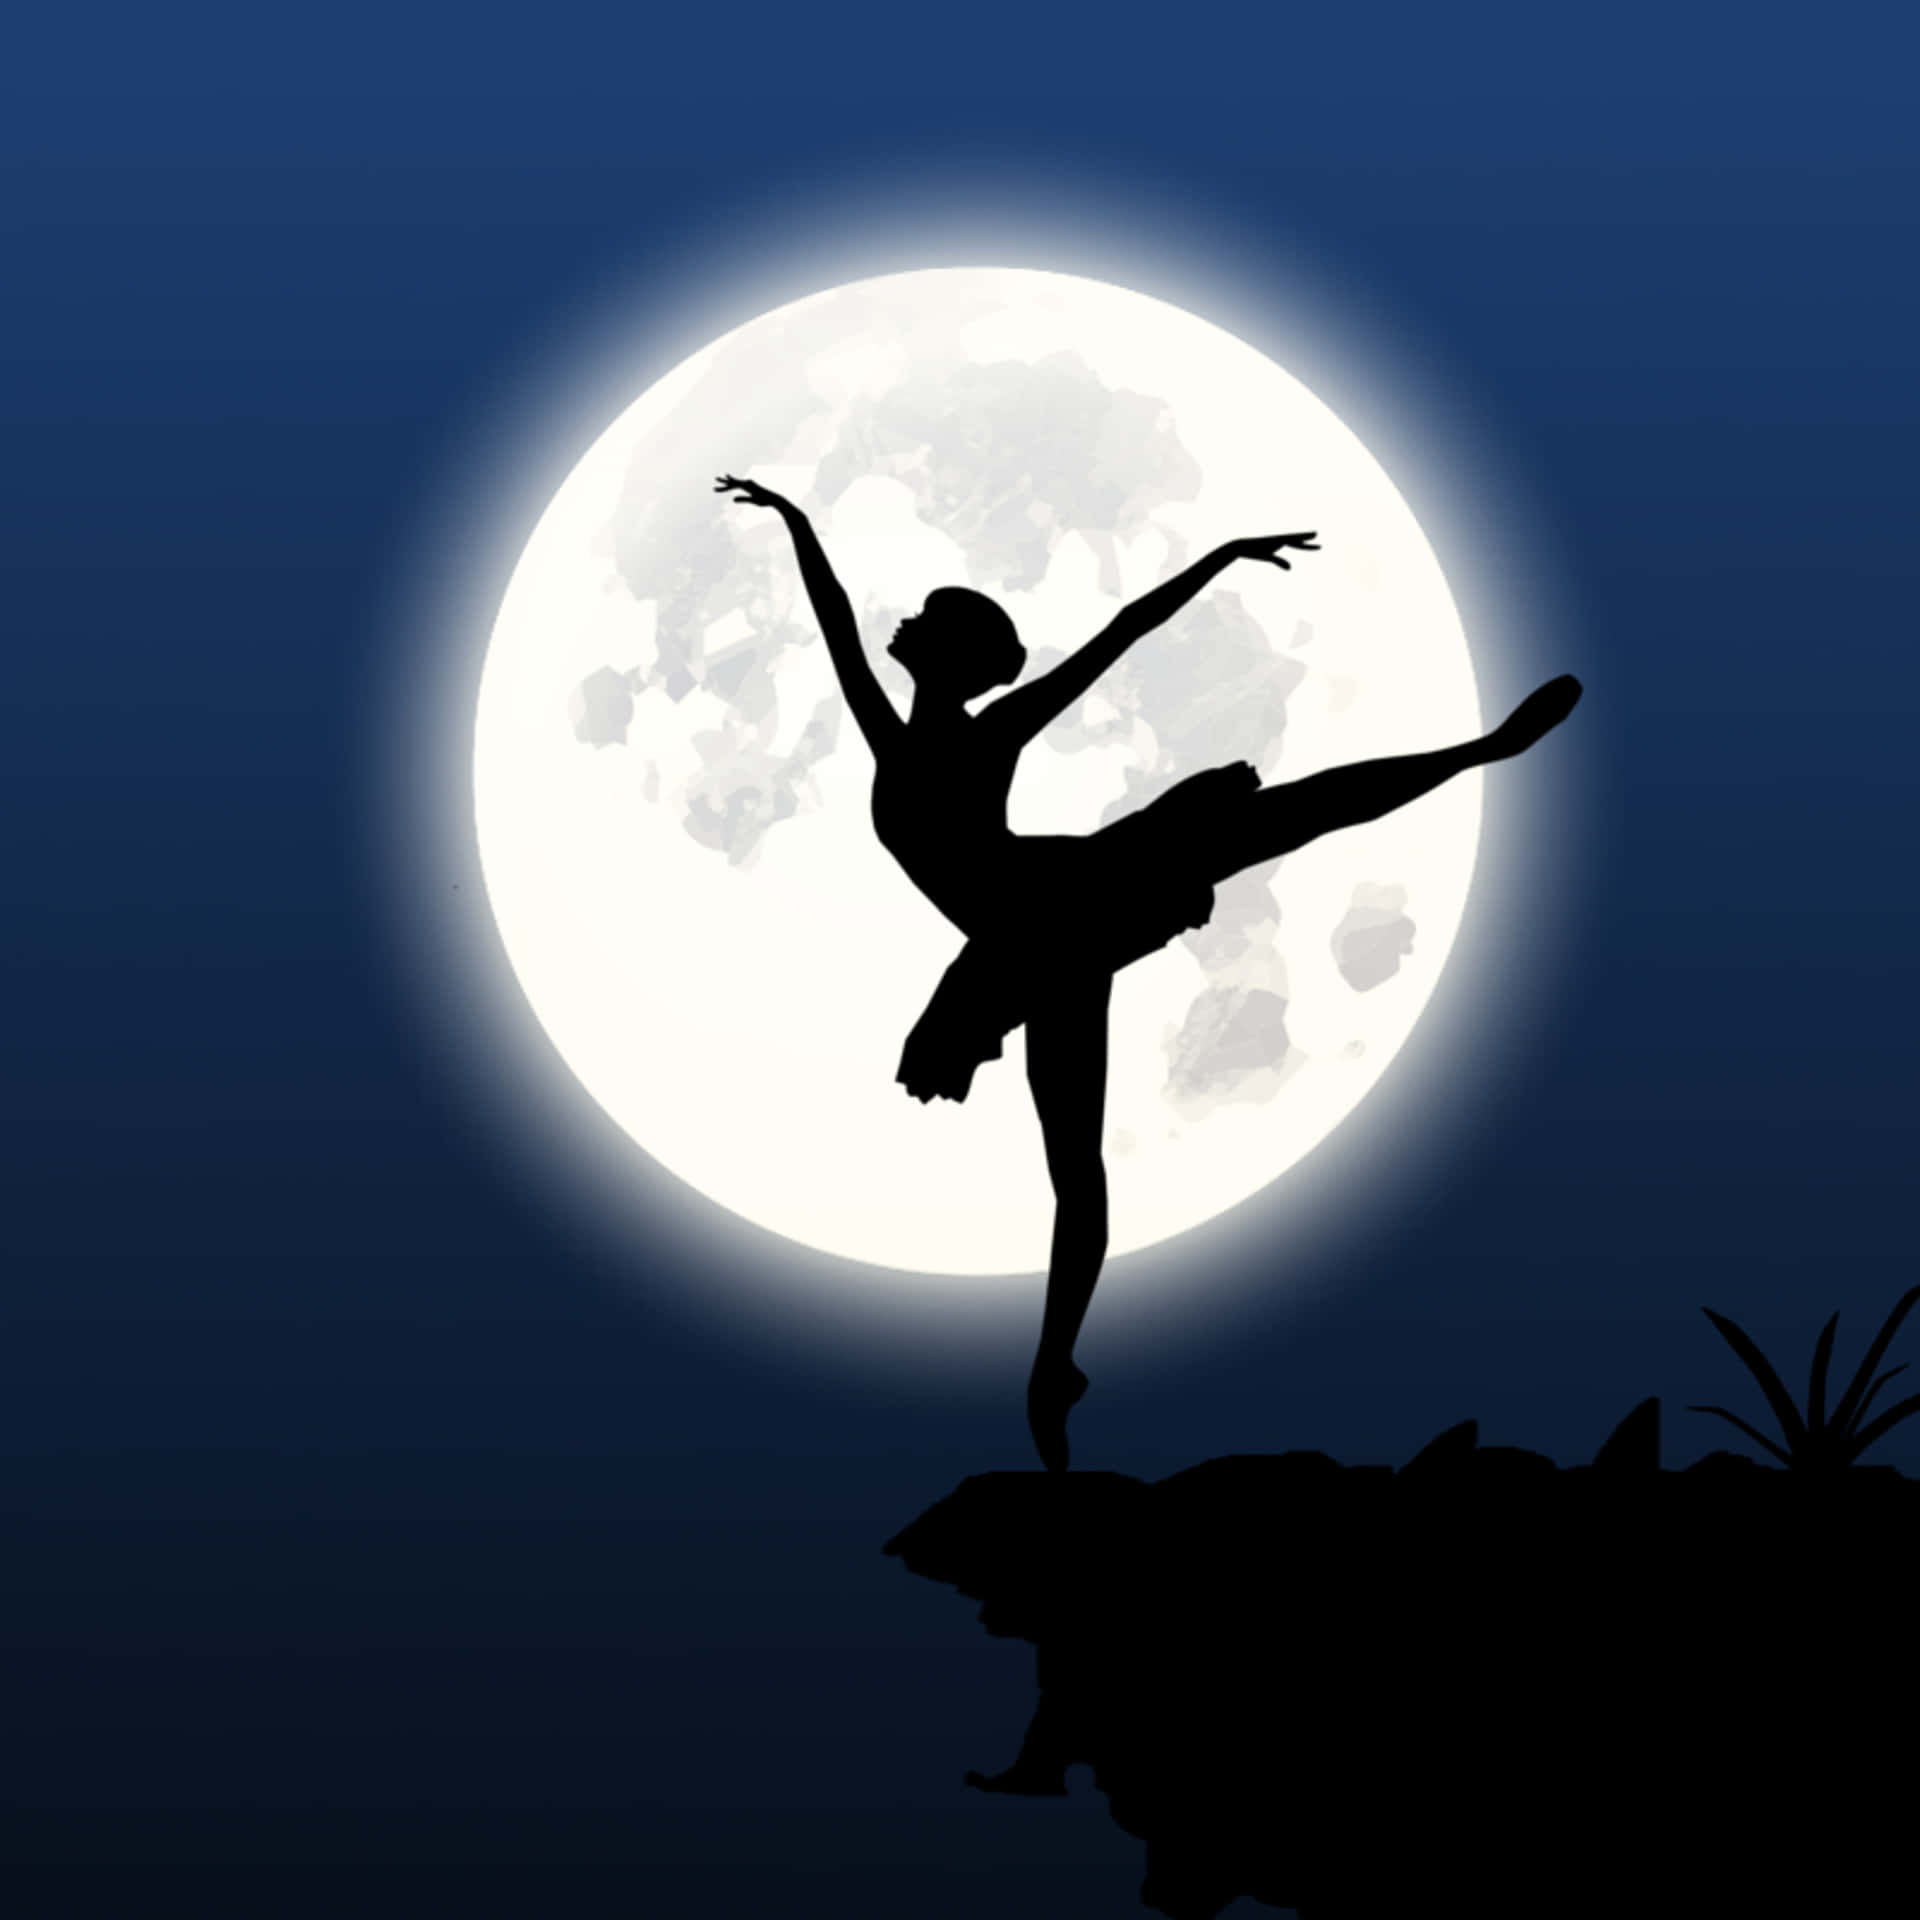 A Silhouette Of A Ballerina In Front Of The Moon